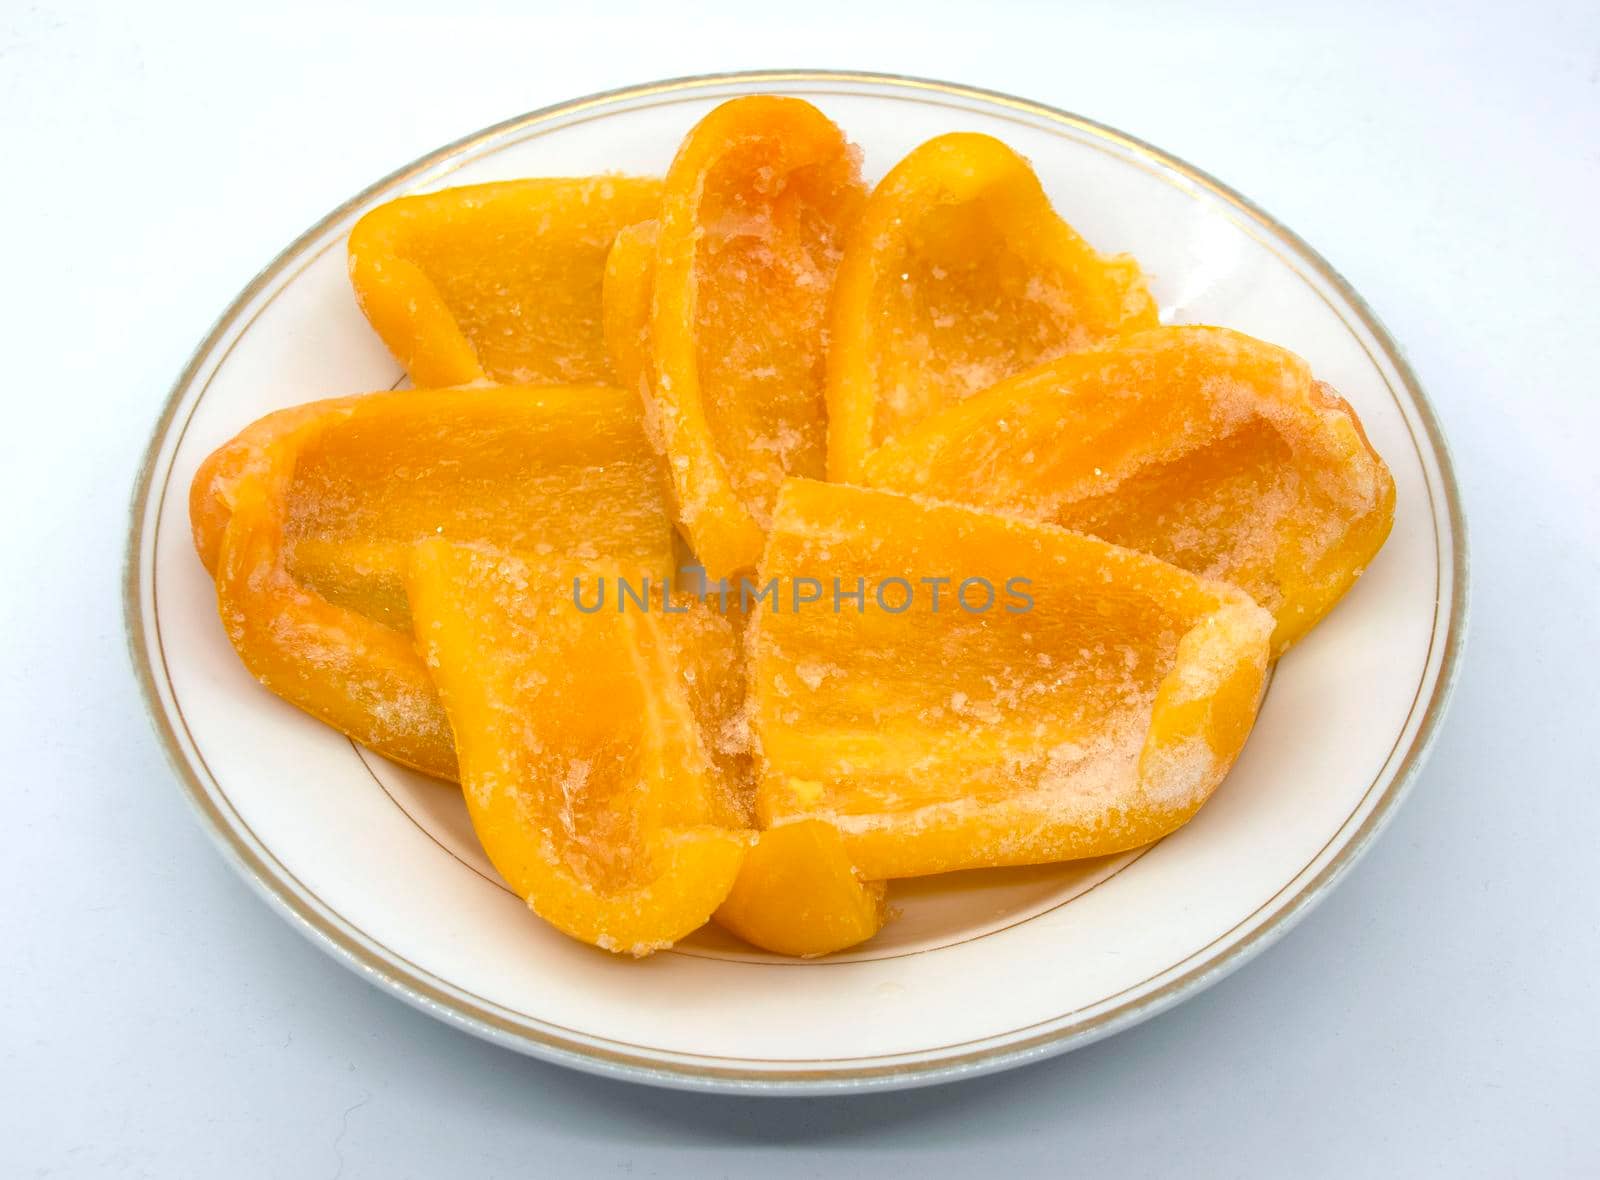 On a white plate lies frozen yellow bell pepper sliced into wedges.